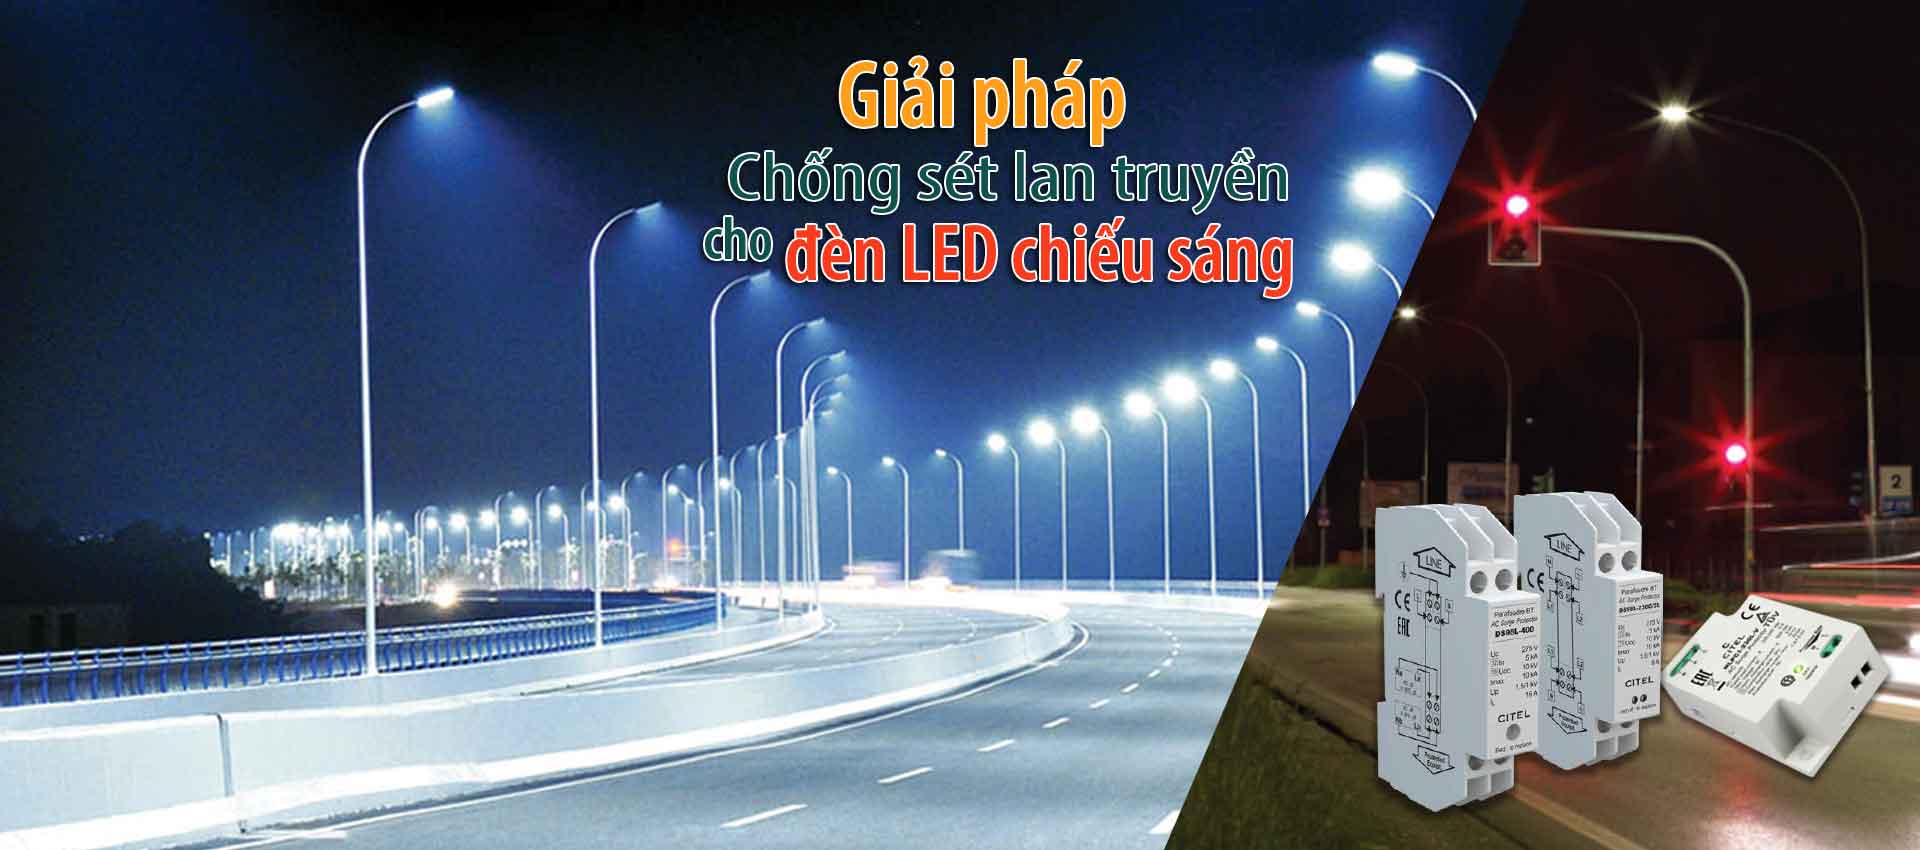 Surge protection solution for LED Lighting systerm